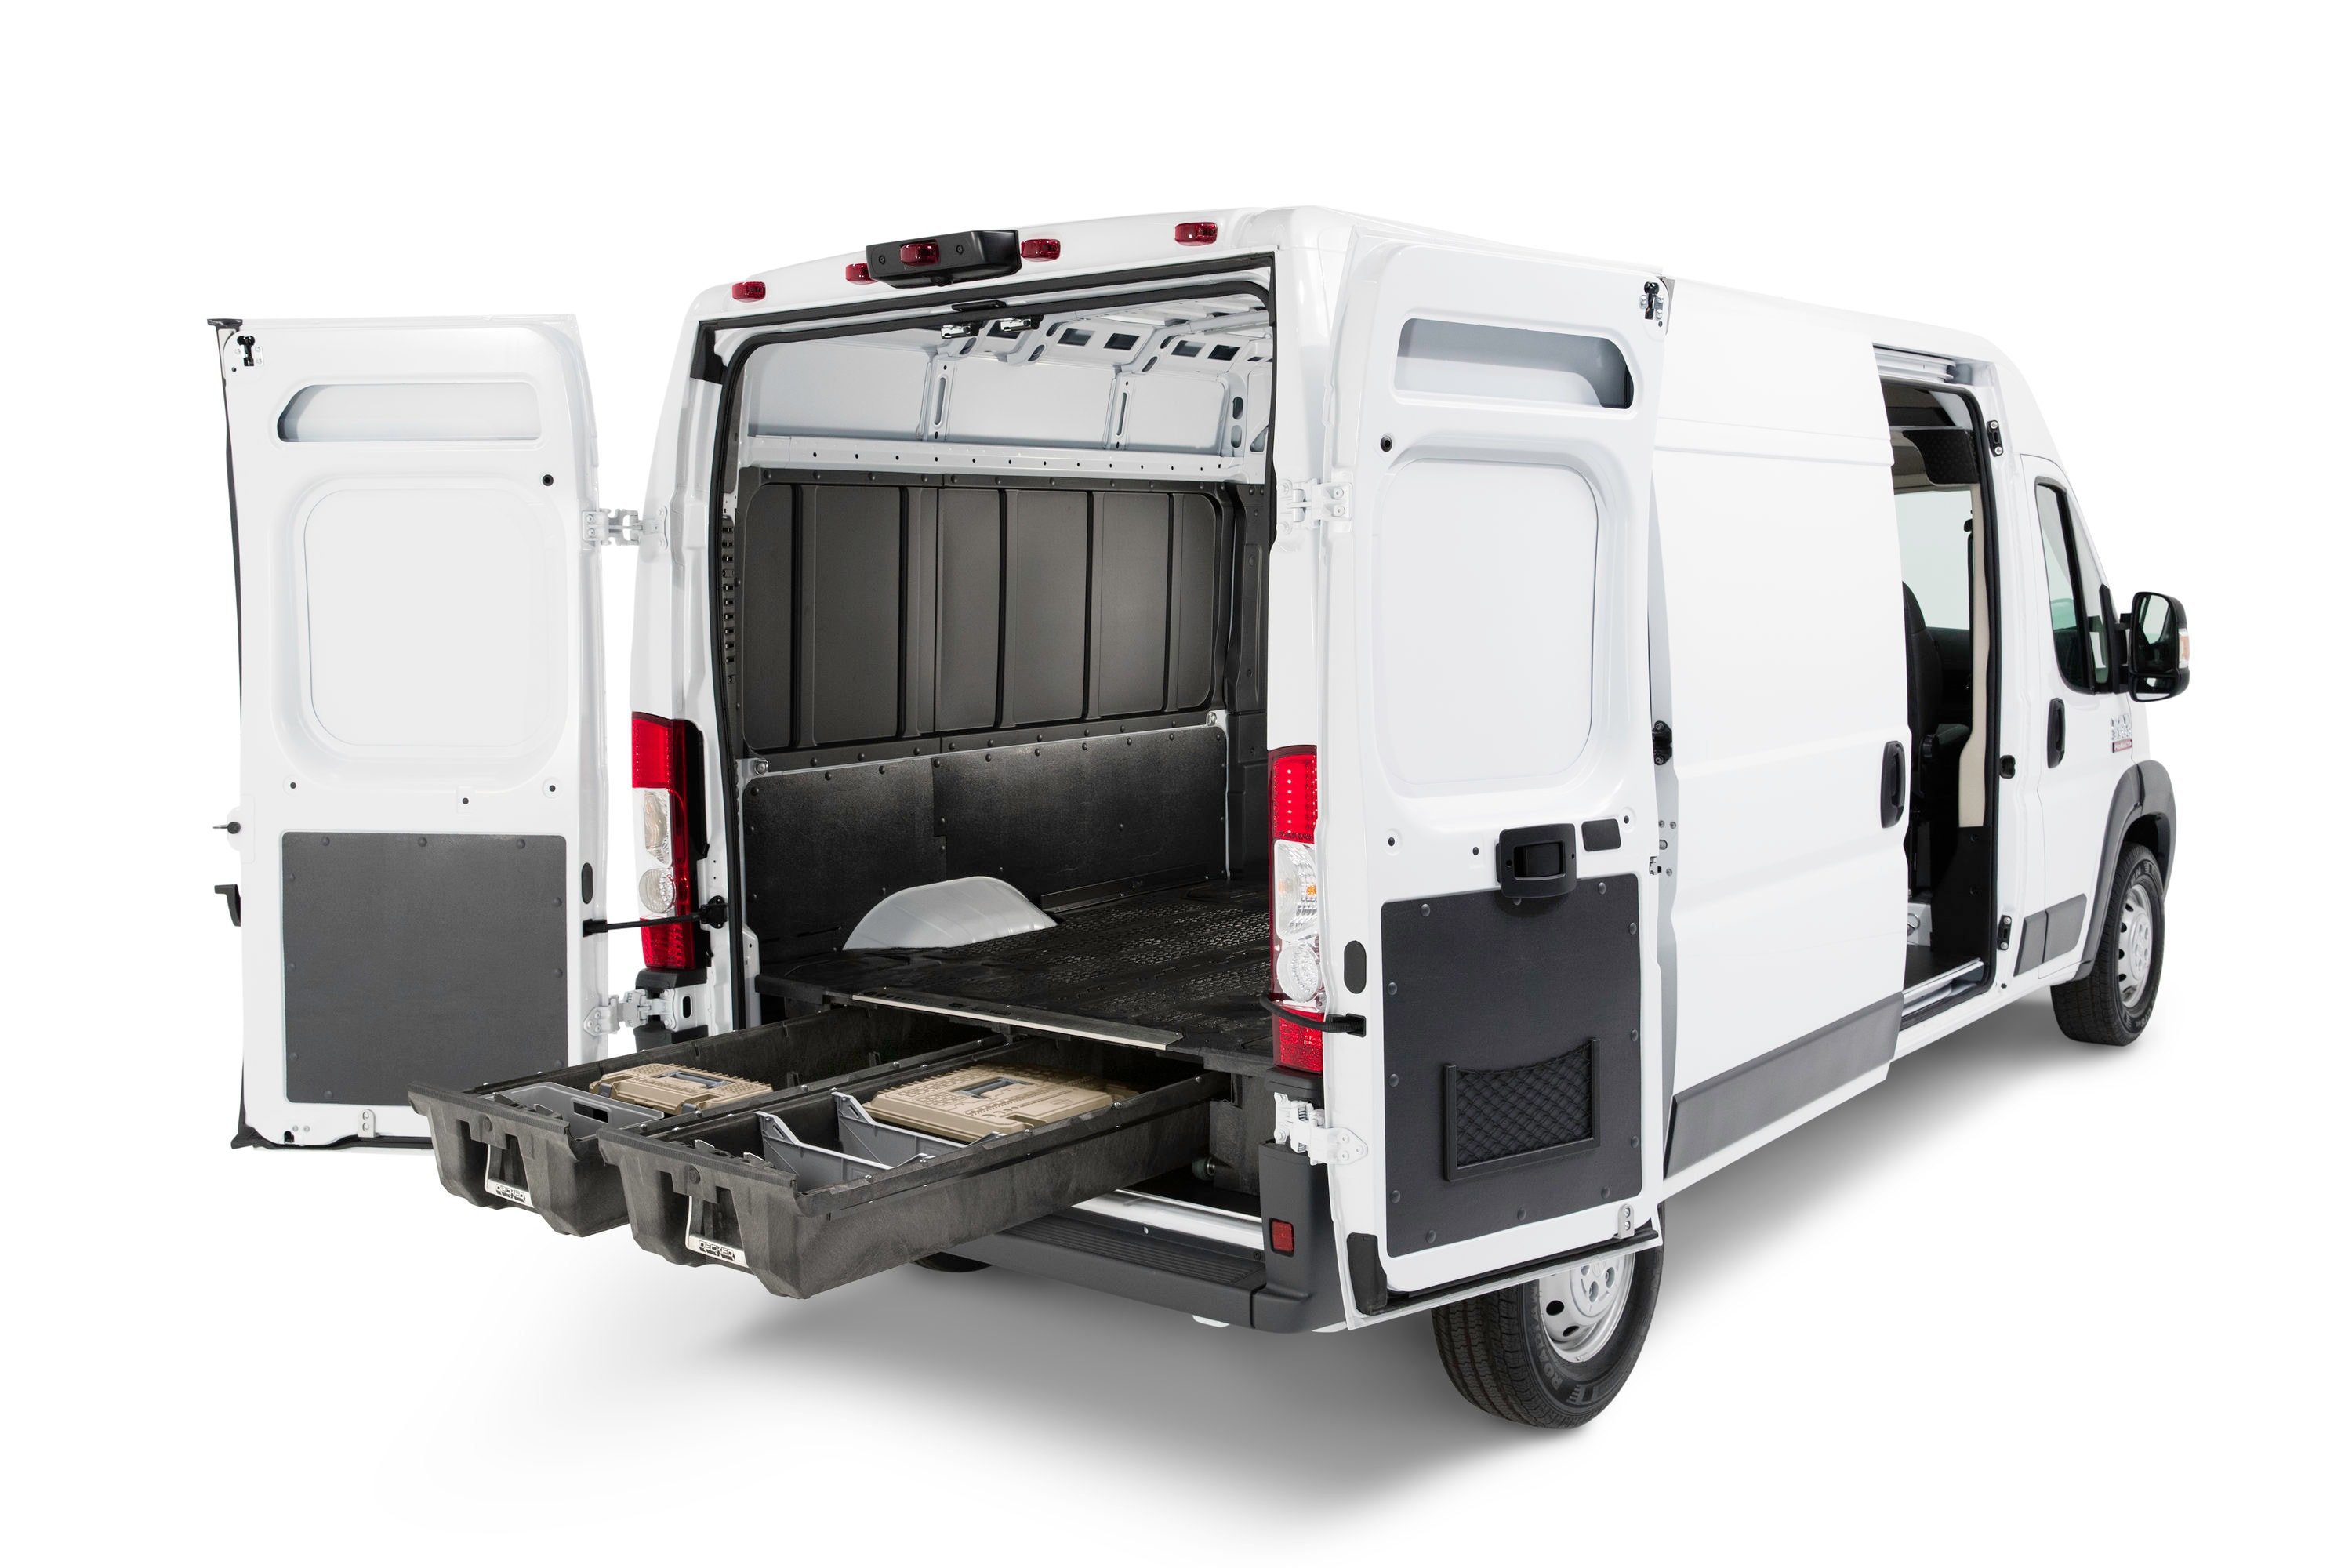 DECKED DECKED Storage System for RAM Promaster Cargo Van (2014-current)-  136-in Wheel Base in the Truck Tool Box & Cargo Accessories department at  Lowes.com